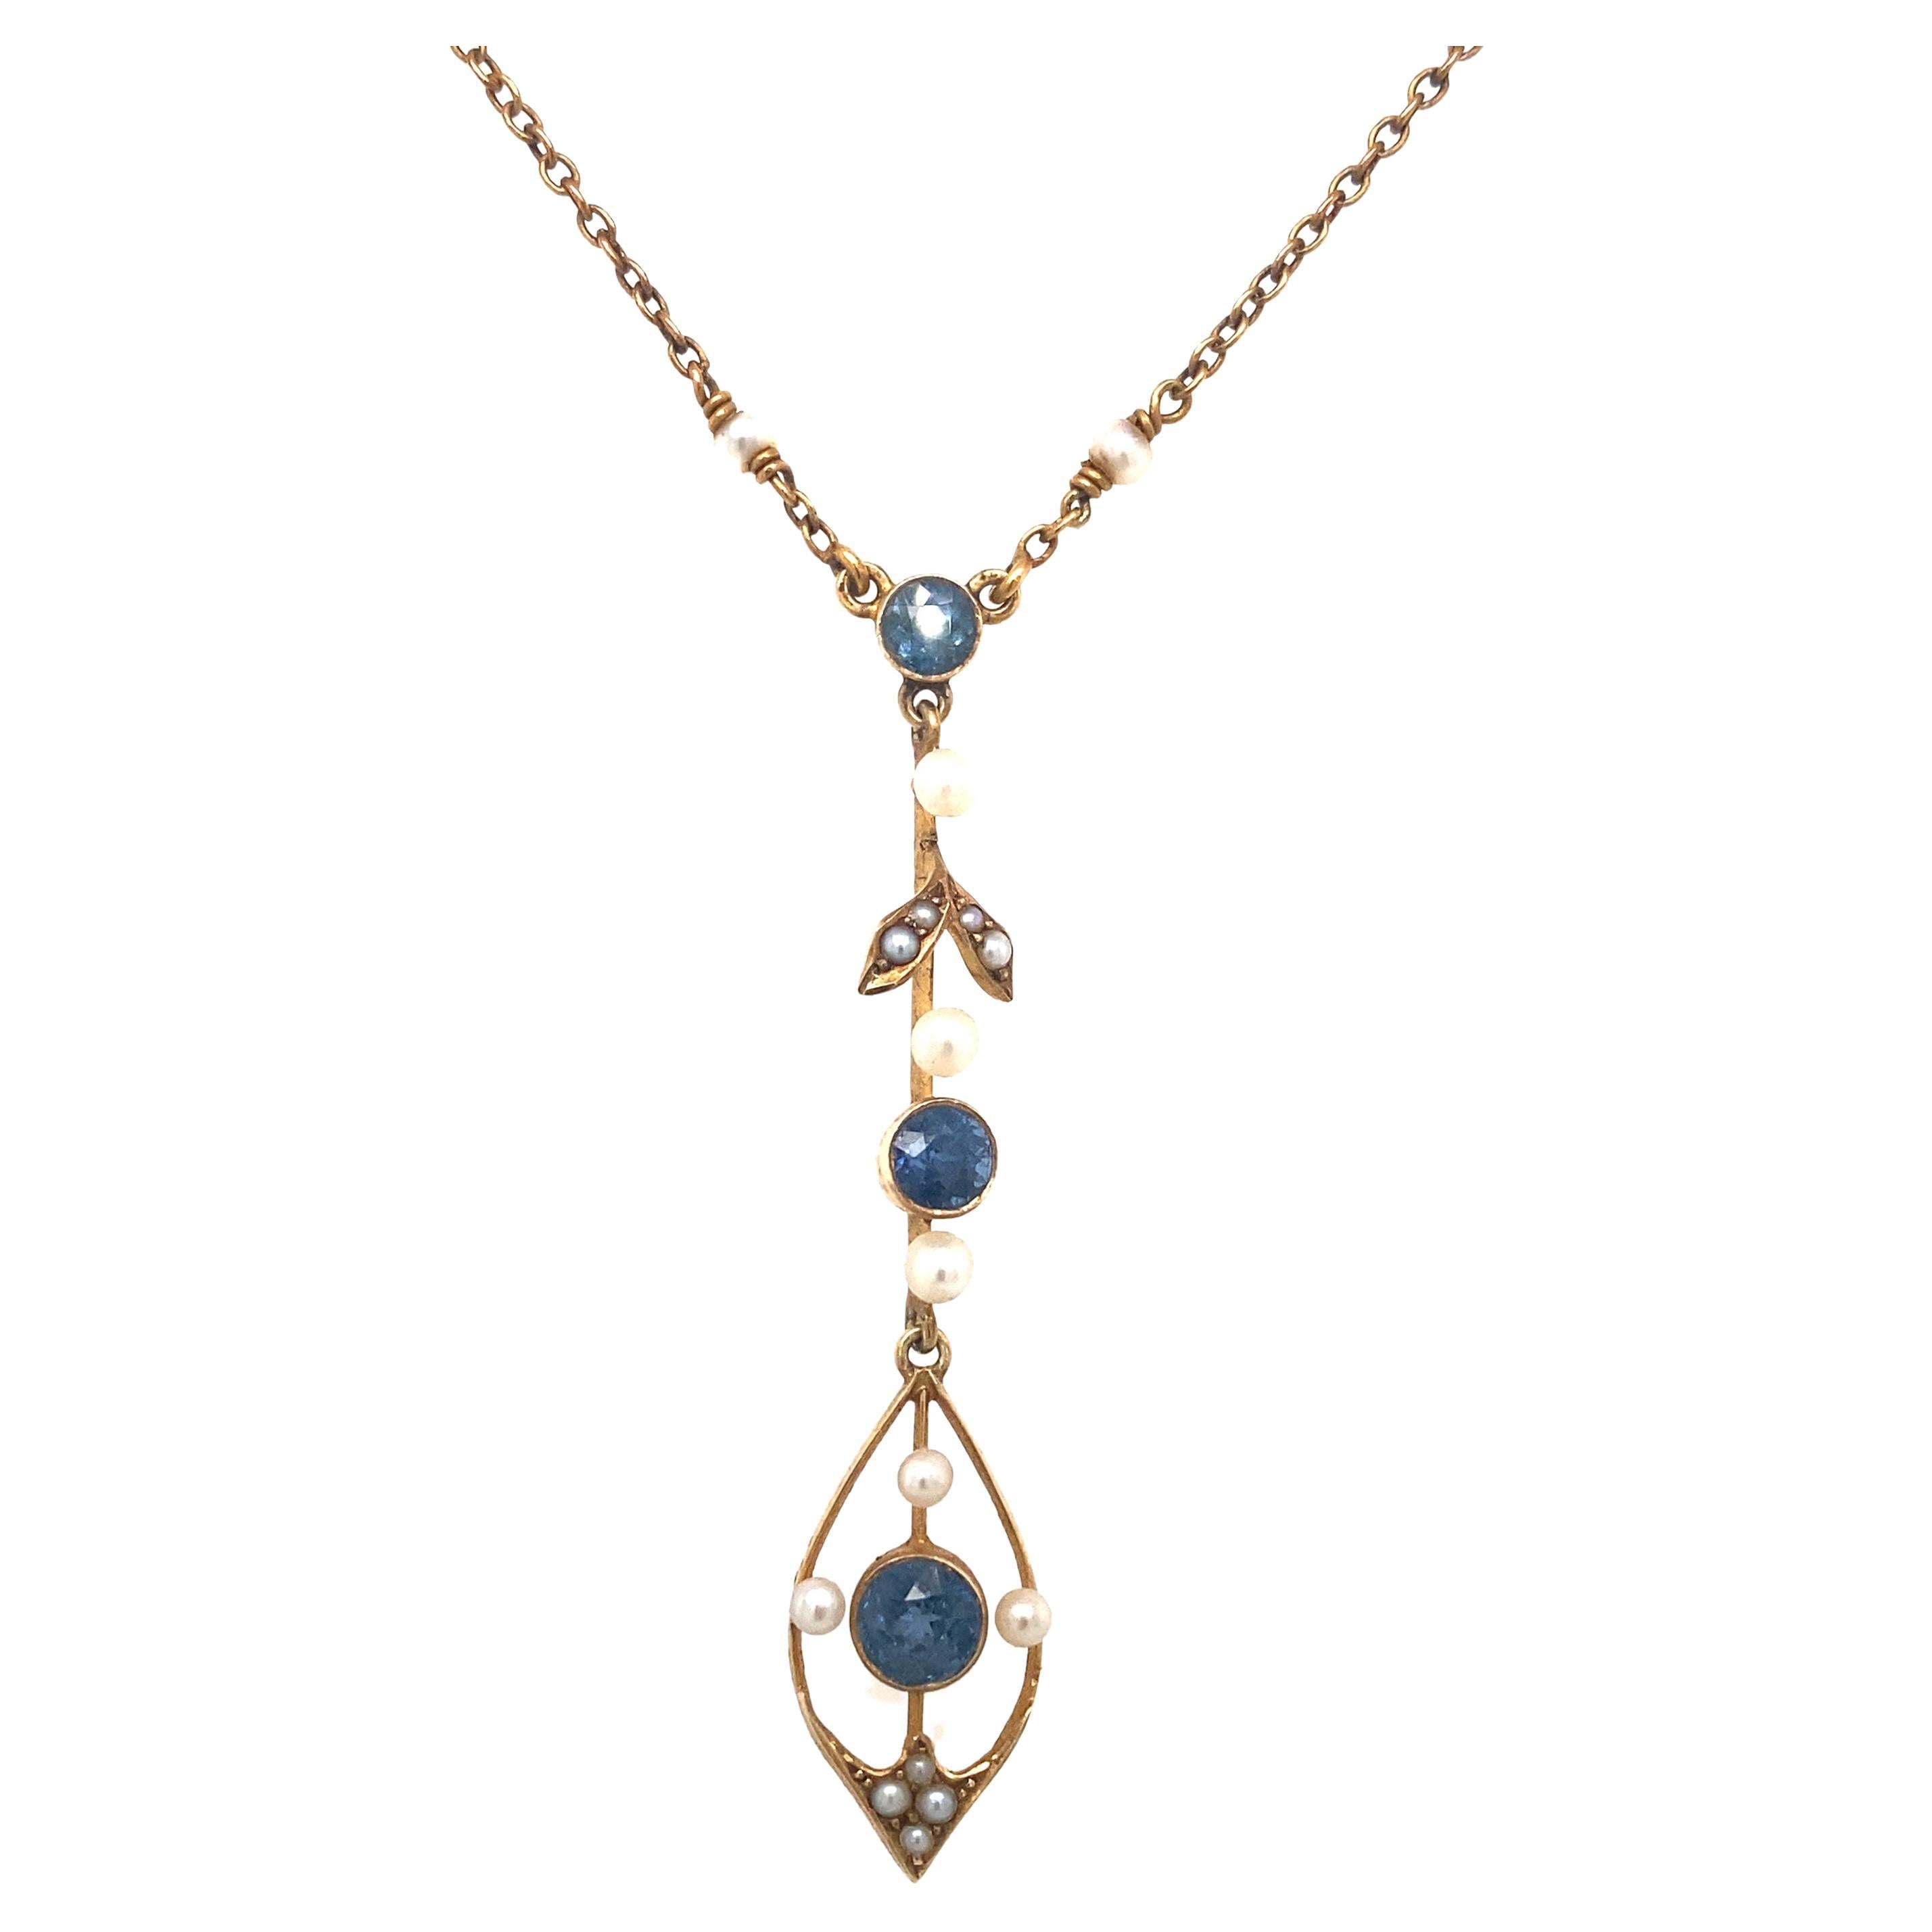 Circa 1890s Victorian Pearl and Sapphire Lavalier Necklace in 14 Karat Gold